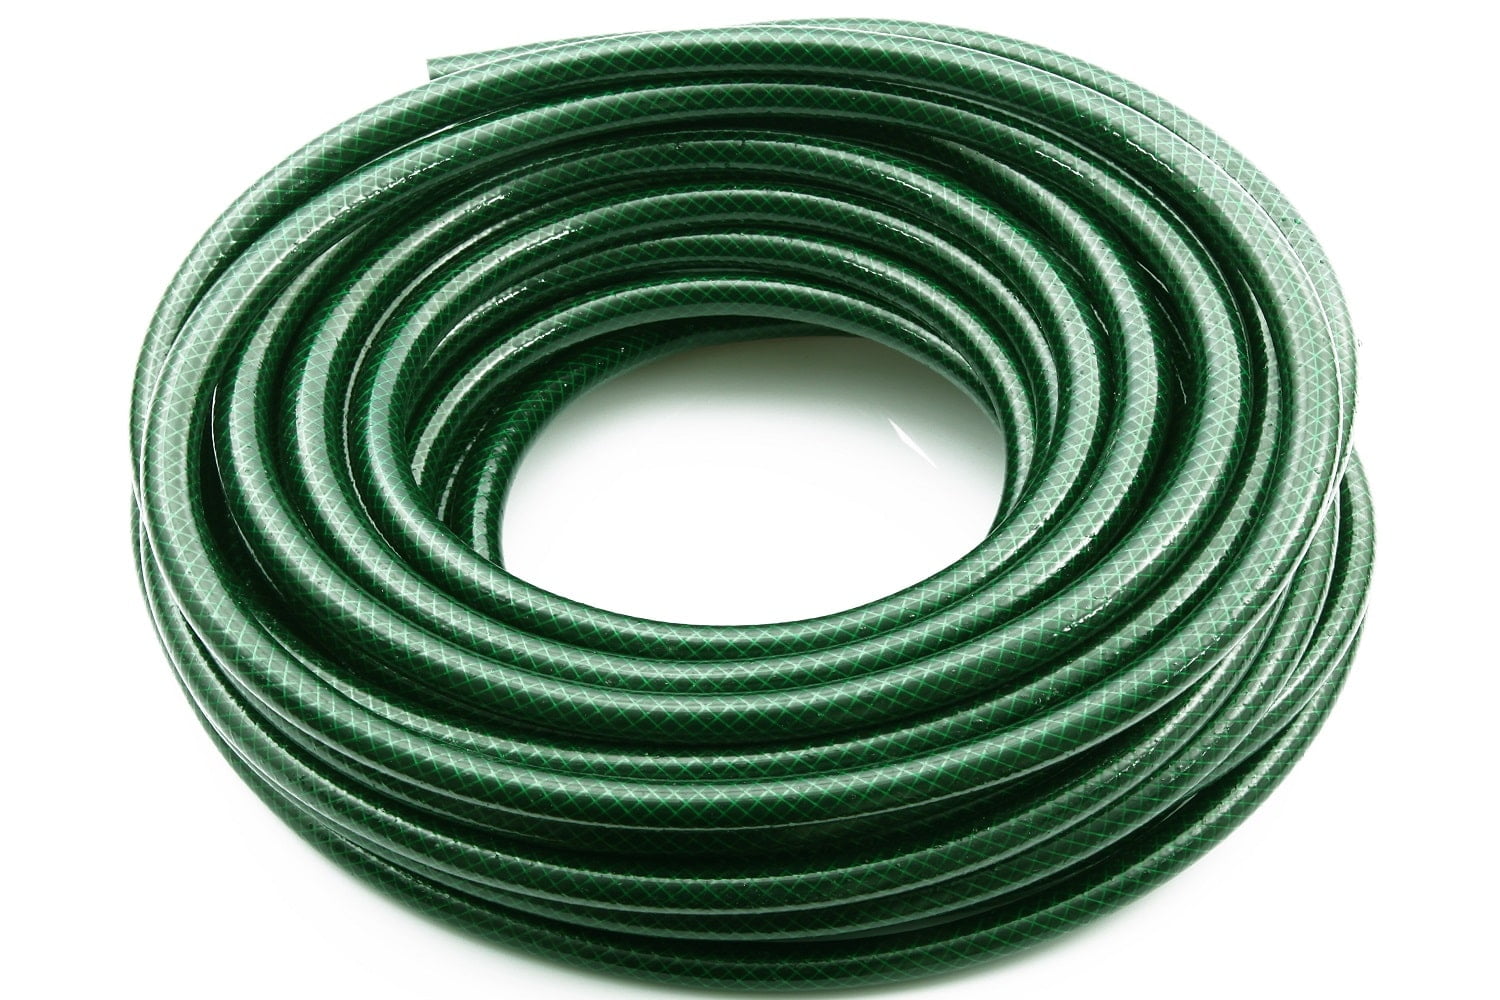 Expandable Hose Buyers’ Guide